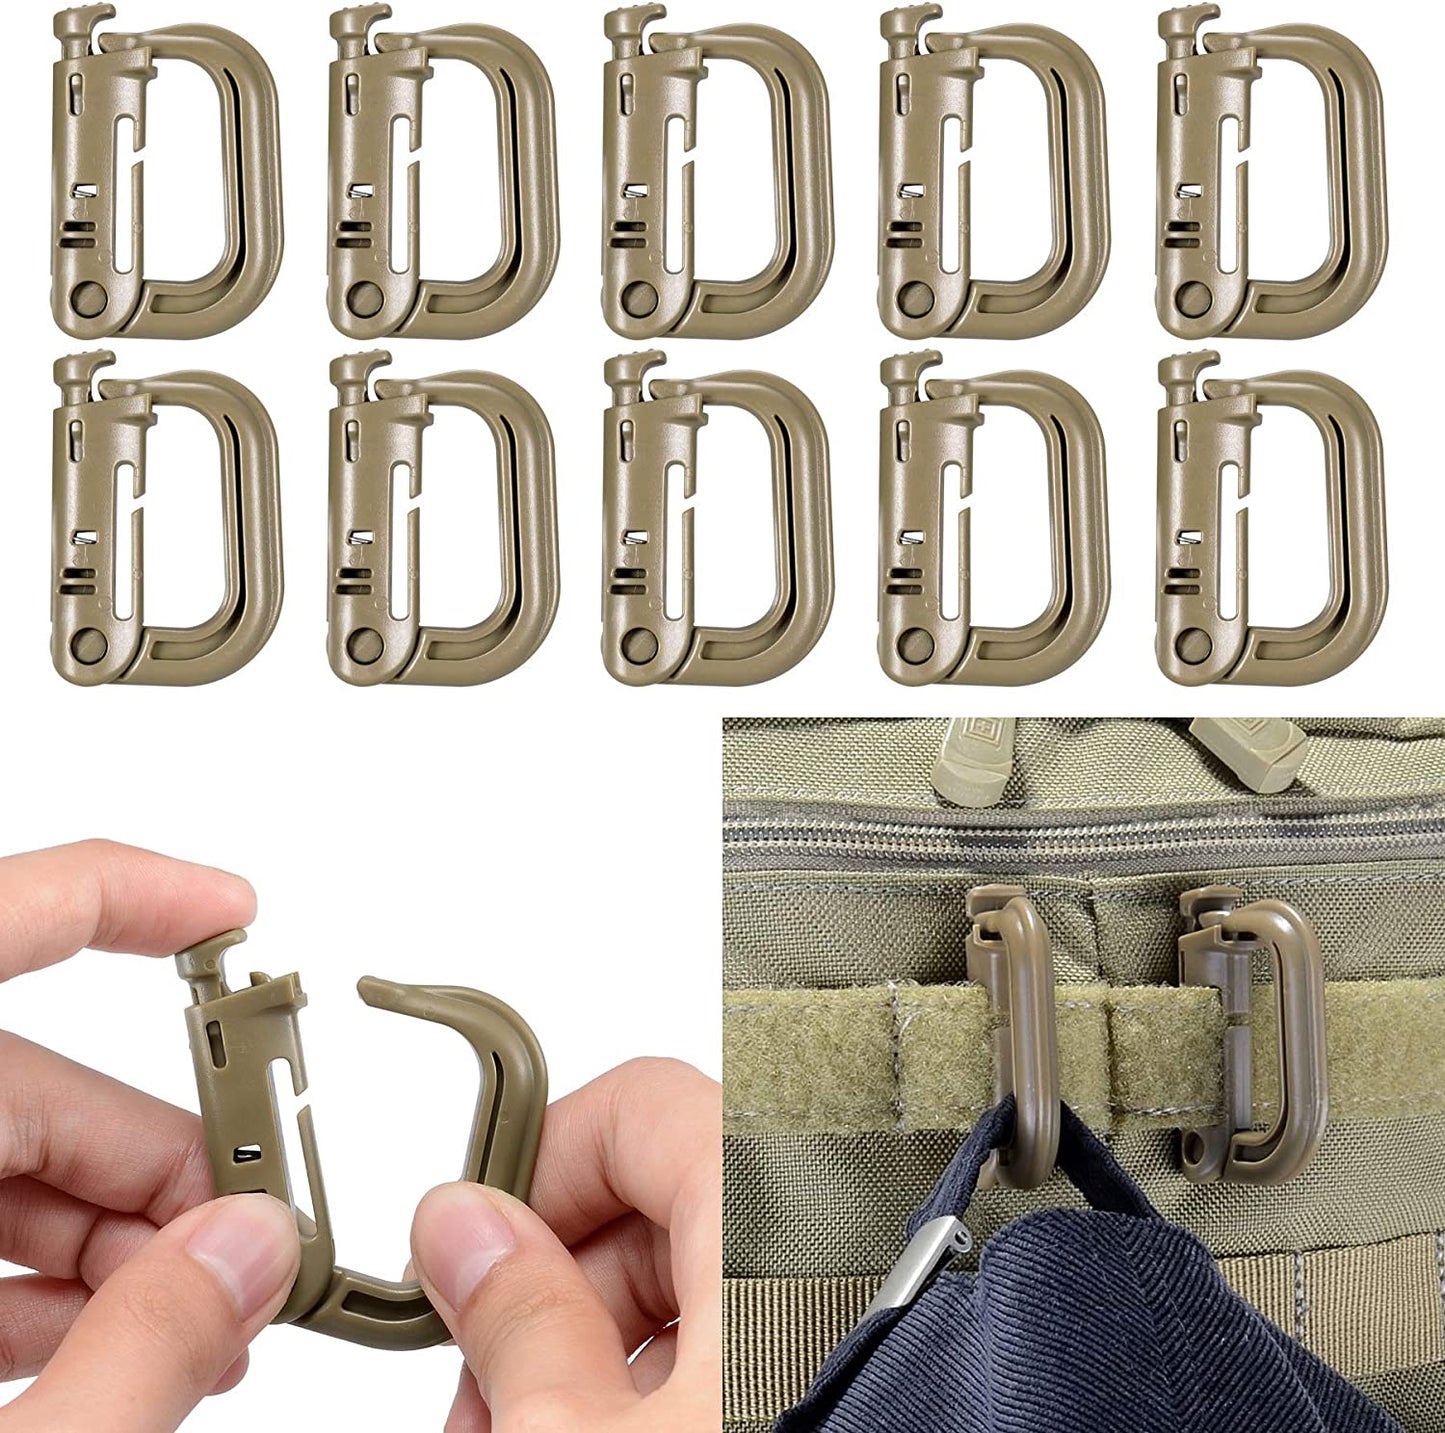 URBAN Wanted Khaki 10x D-Ring Locks For Ultimate Backpack MOLLE Webbing Straps System